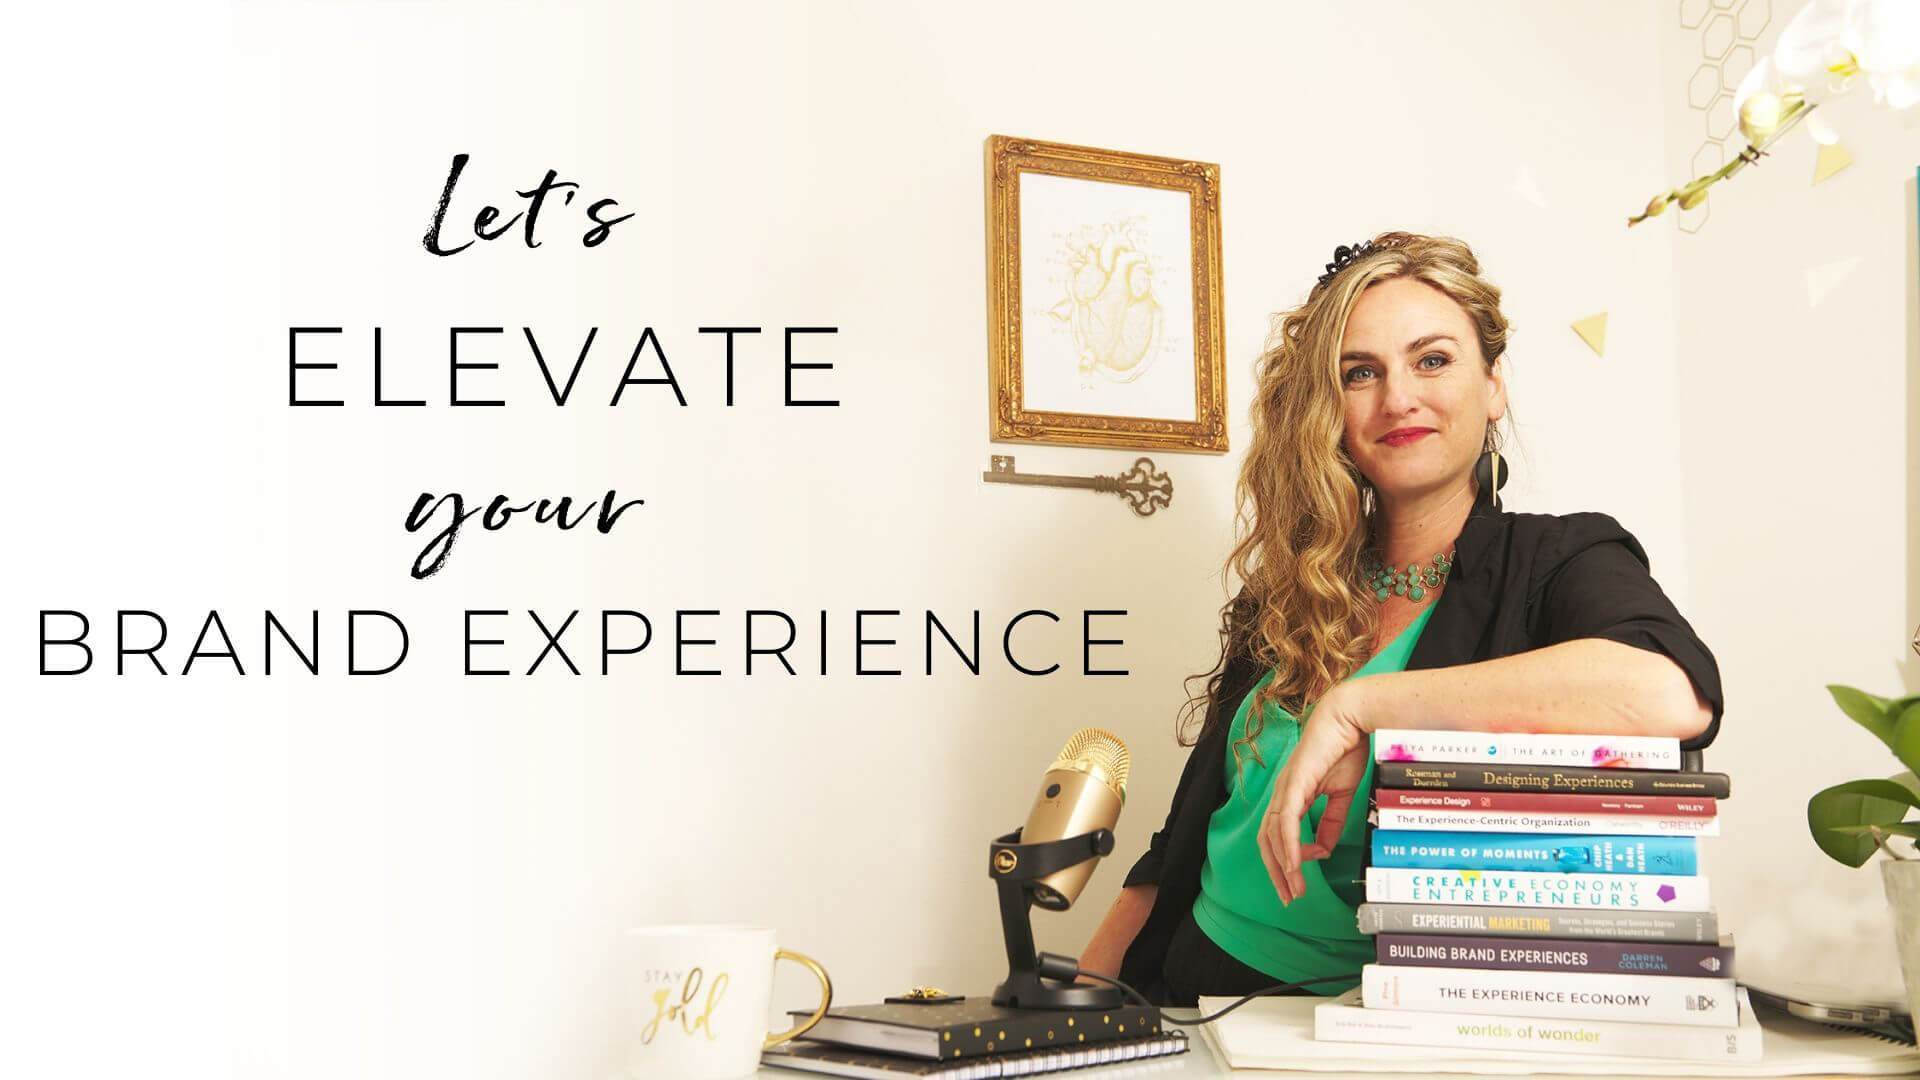 Brand Experience Design, Consulting, & Strategy Services by Audette of Catalyst Experiential